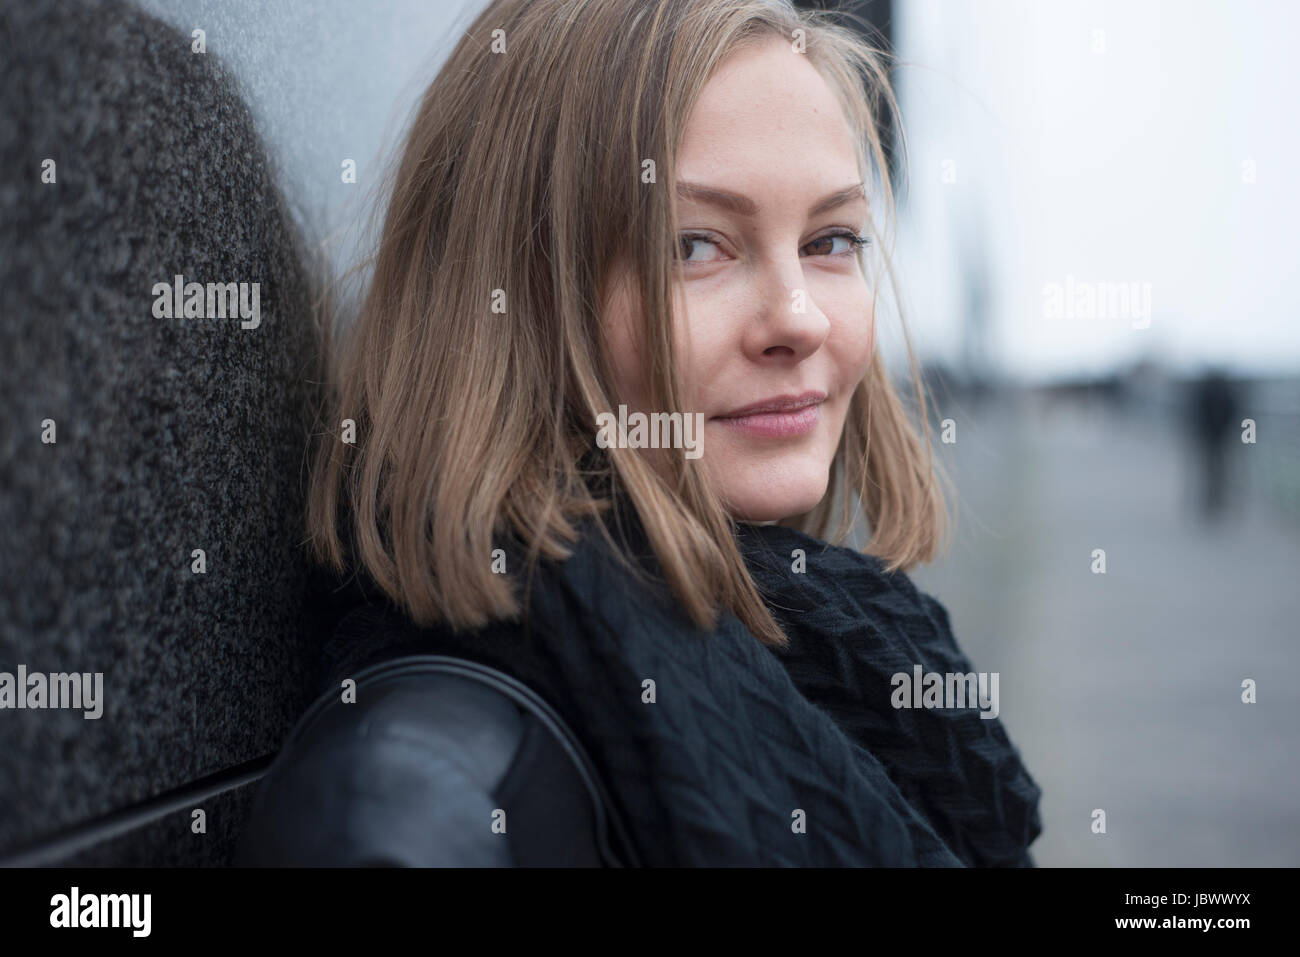 Portrait of young woman leaning against wall in city Stock Photo